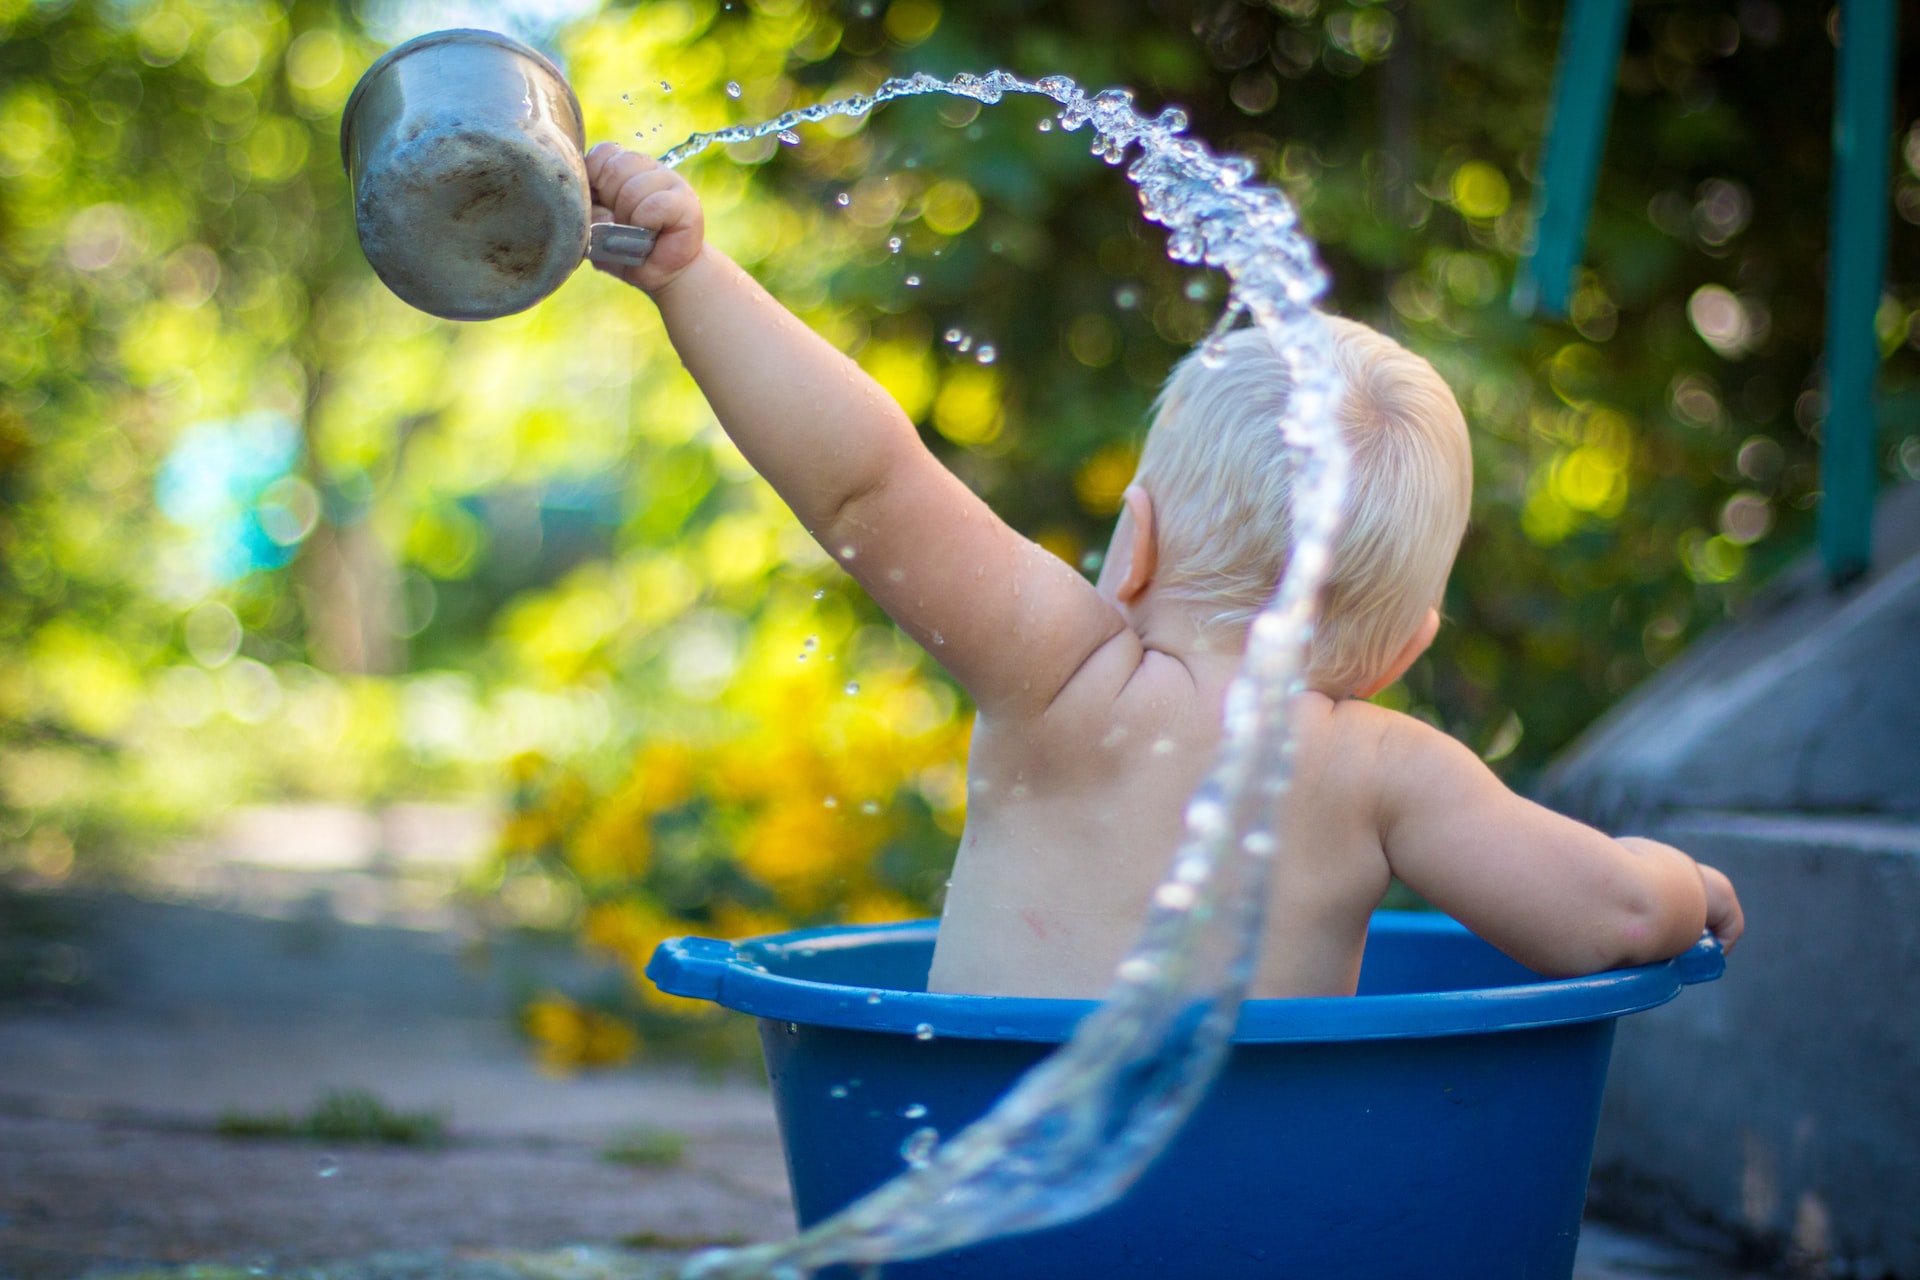 Baby holding a small jug playing with water in a bucket during summer